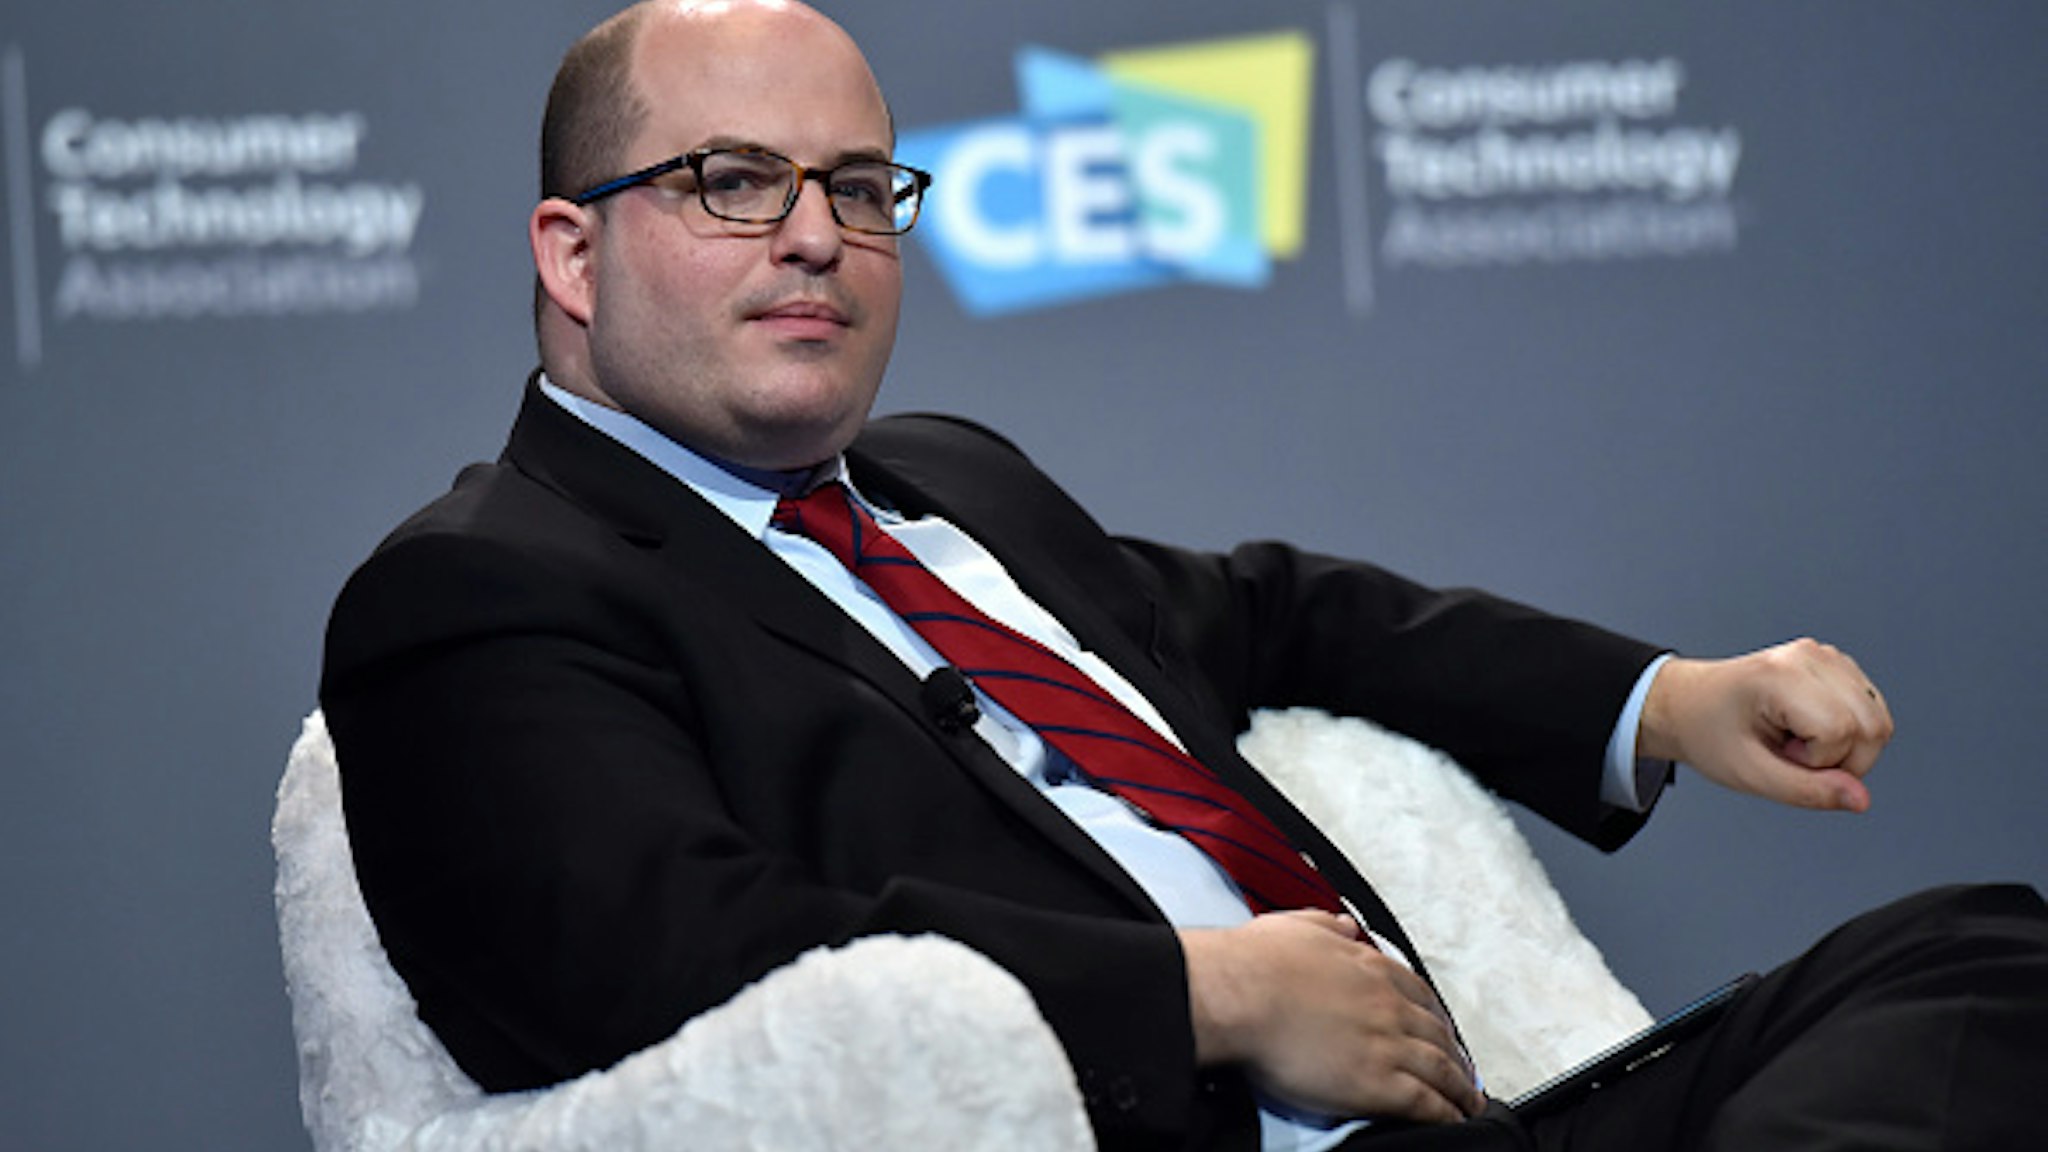 LAS VEGAS, NEVADA - JANUARY 09: CNN anchor and correspondent Brian Stelter speaks during a press event at CES 2019 at the Aria Resort &amp; Casino on January 9, 2019 in Las Vegas, Nevada. CES, the world's largest annual consumer technology trade show, runs through January 11 and features about 4,500 exhibitors showing off their latest products and services to more than 180,000 attendees.